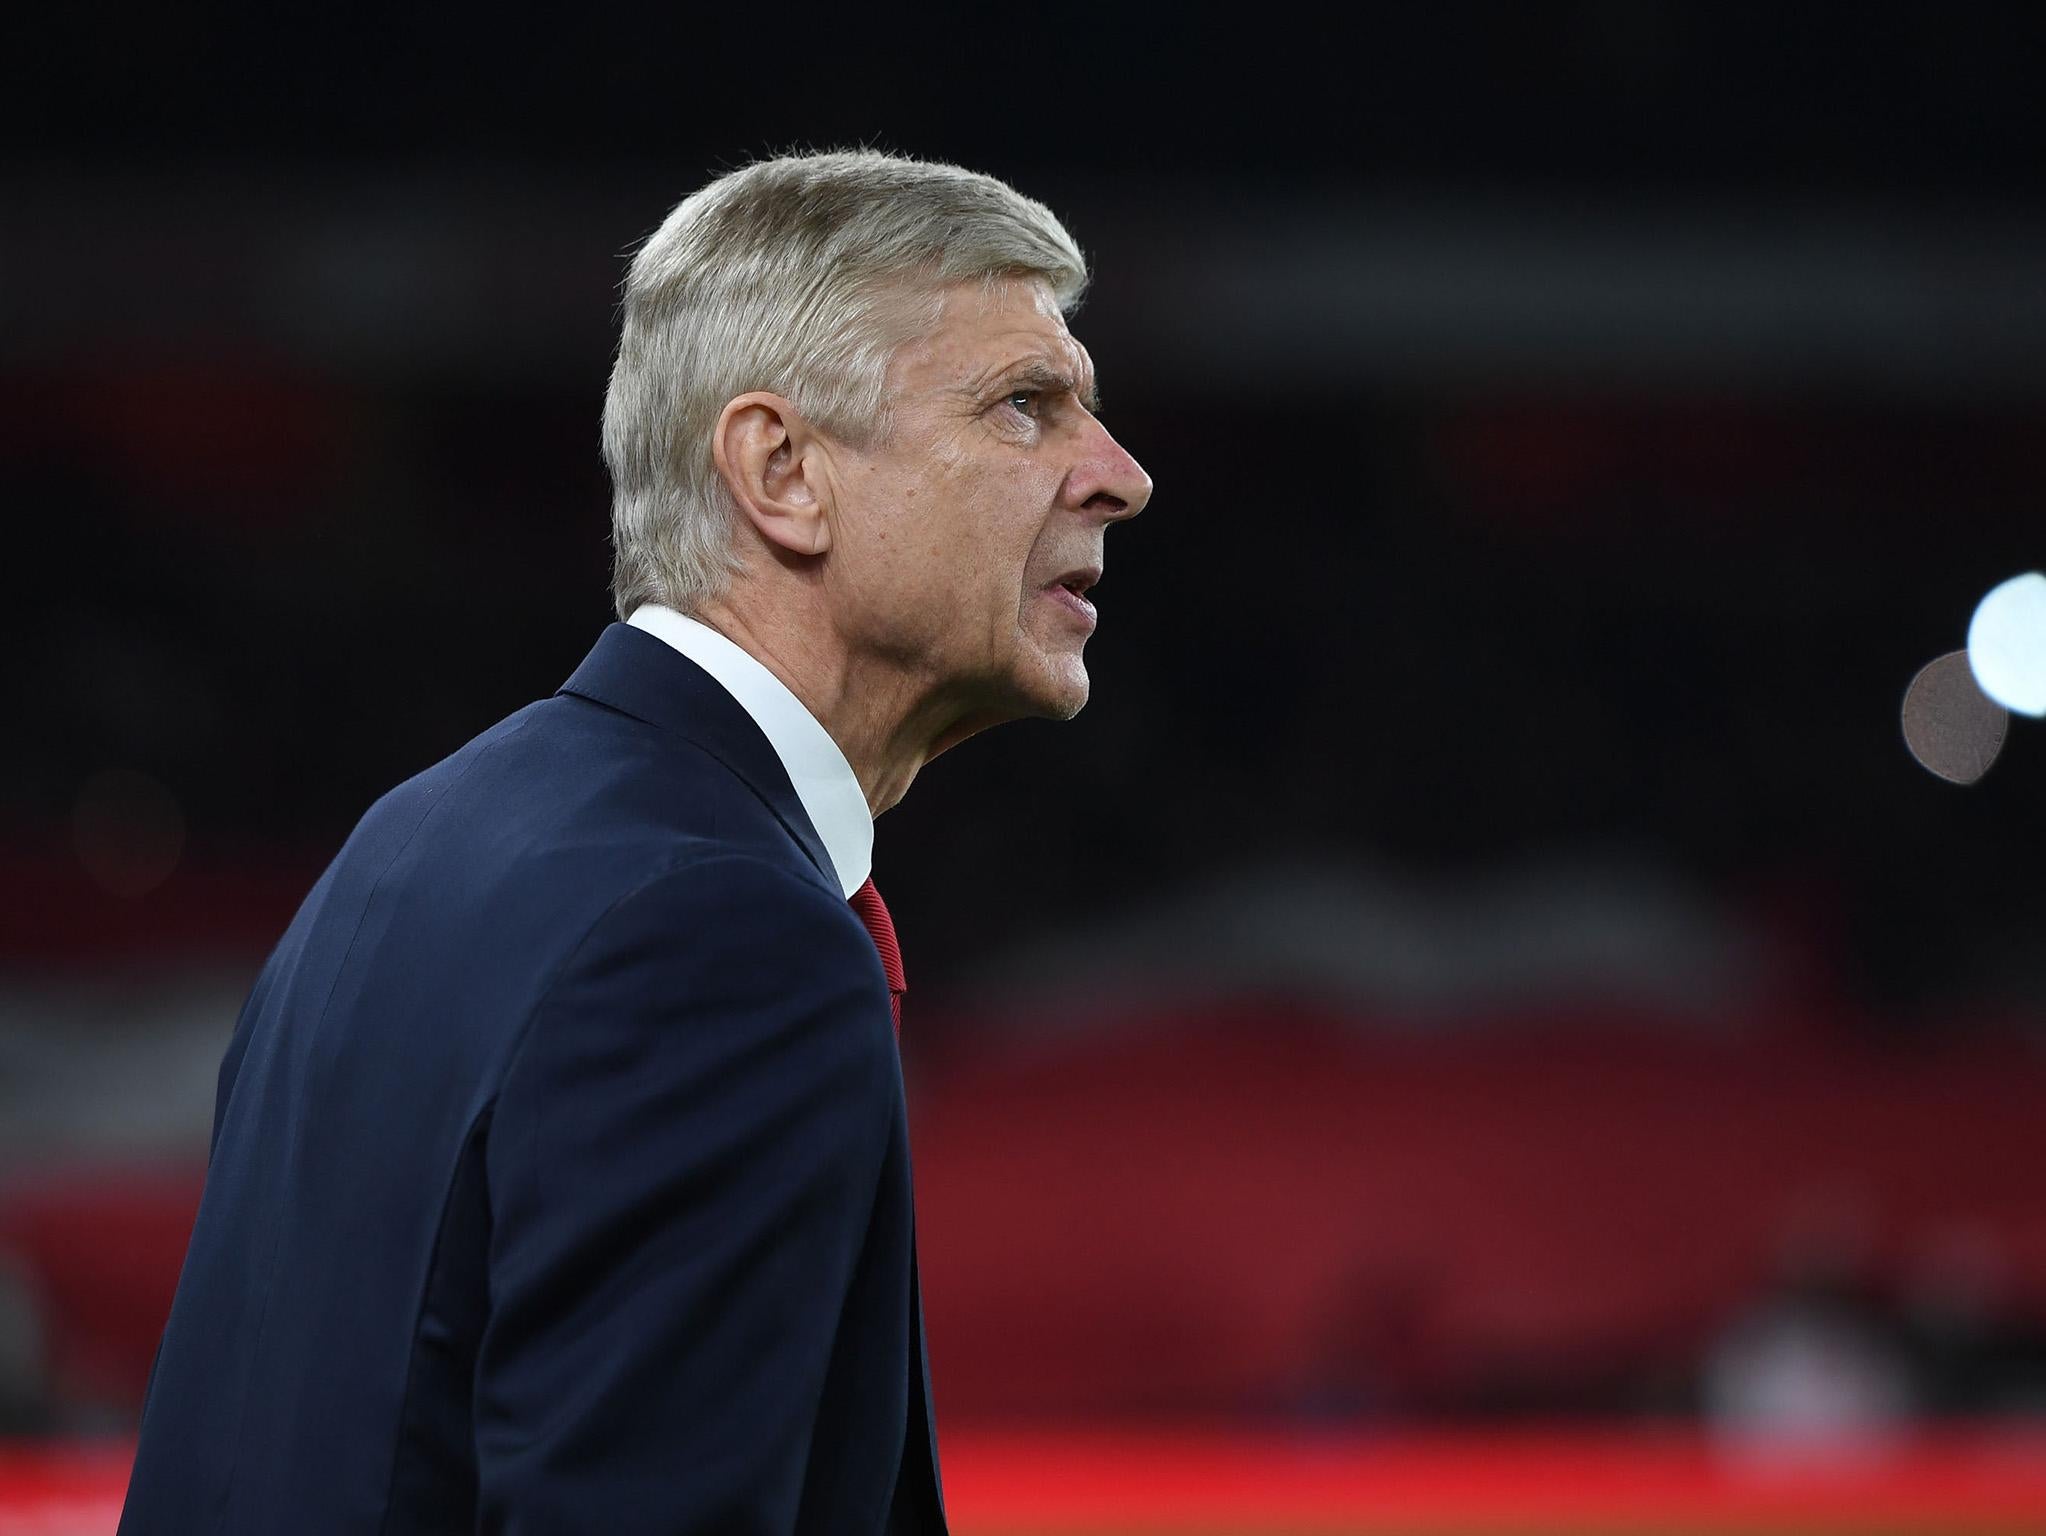 Arsene Wenger was pleased with his side's fighting spirit